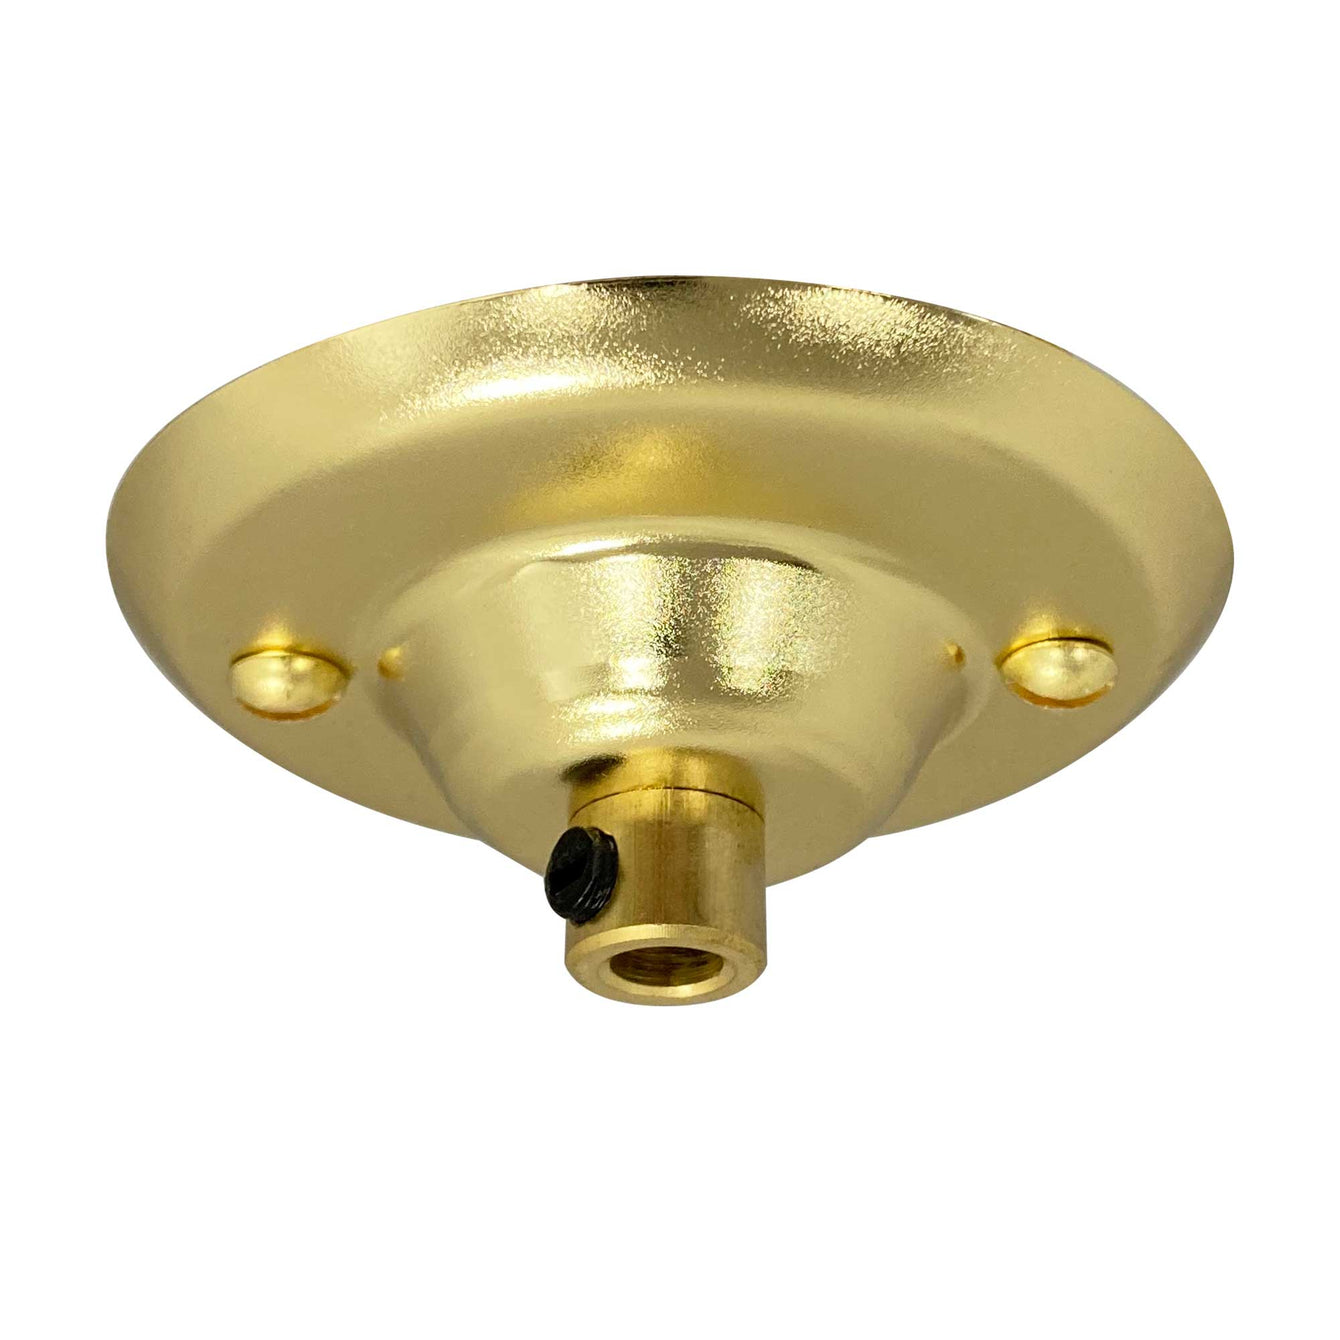 ElekTek 75mm Diameter Ceiling Plate with Cord Grip Metallic Finishes Powder Coated Colours Antique Brass